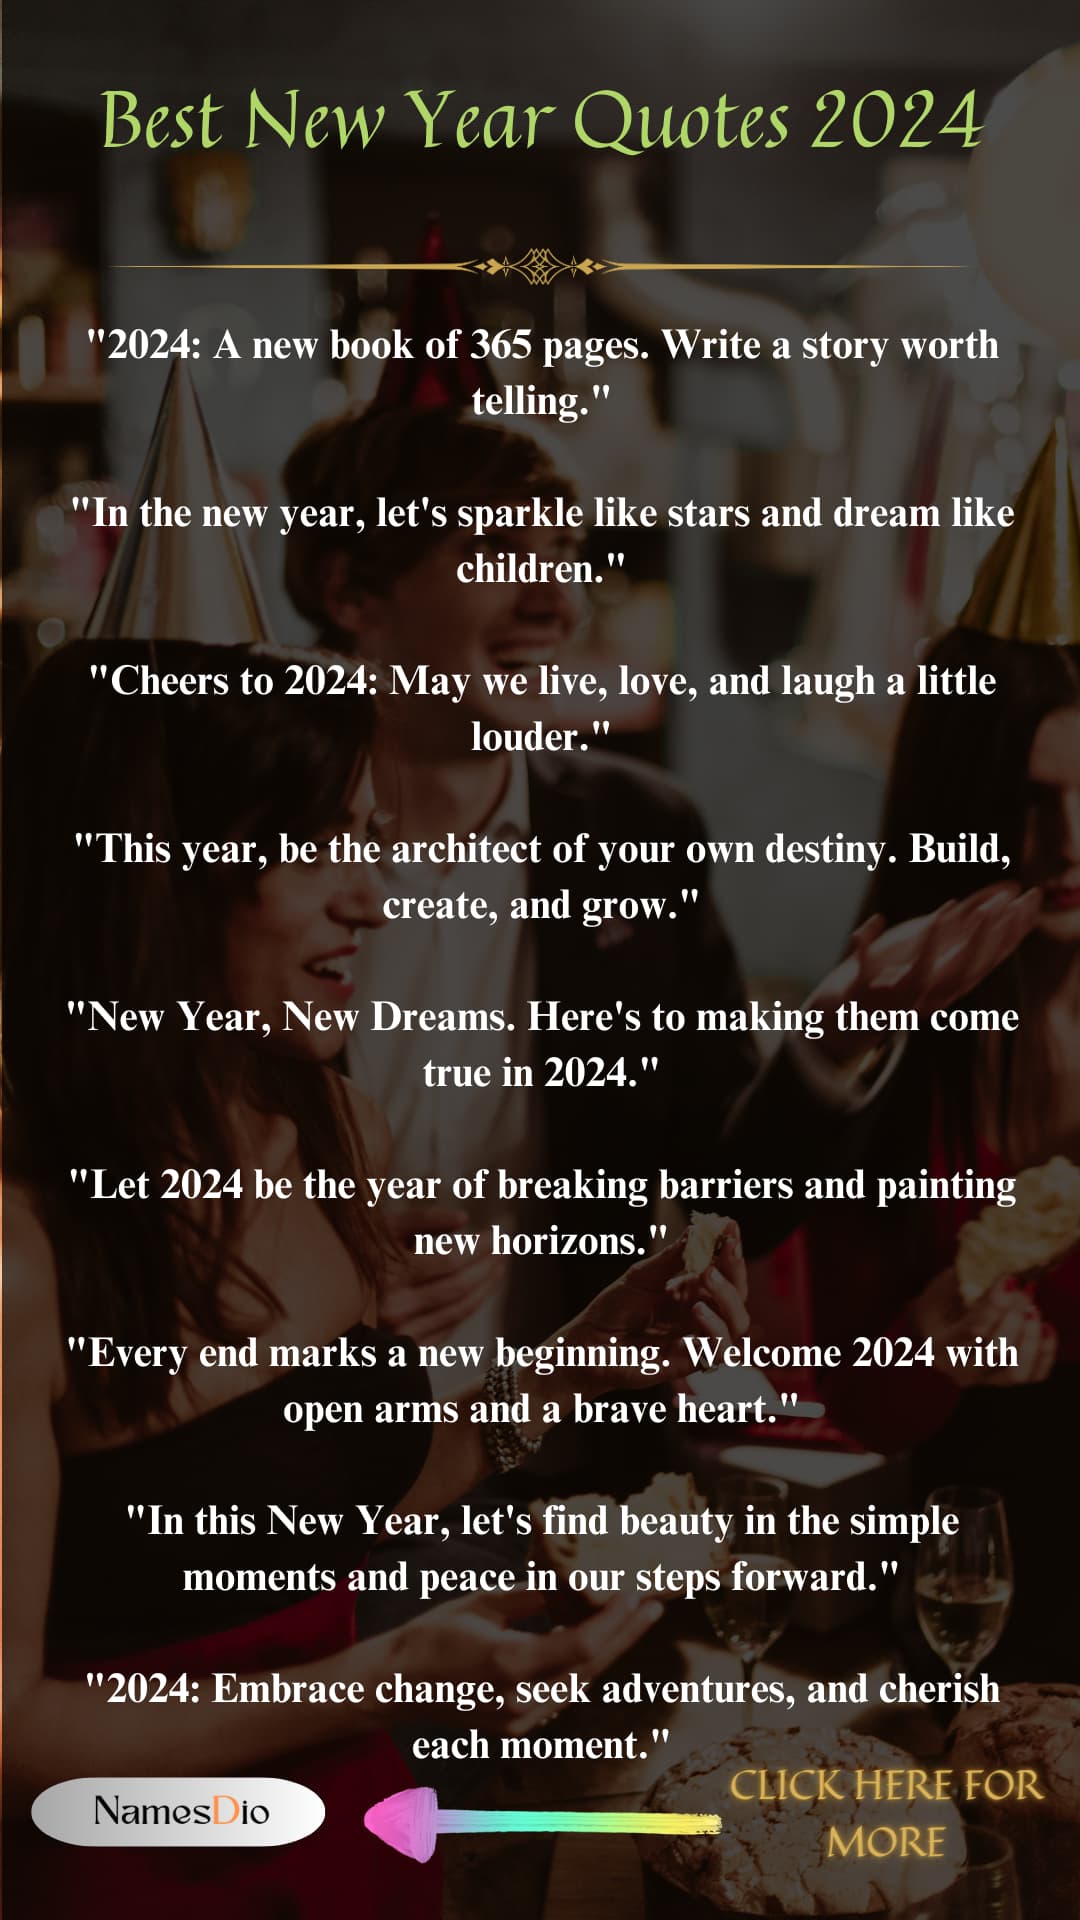 Best-New-Year-Quotes-2024